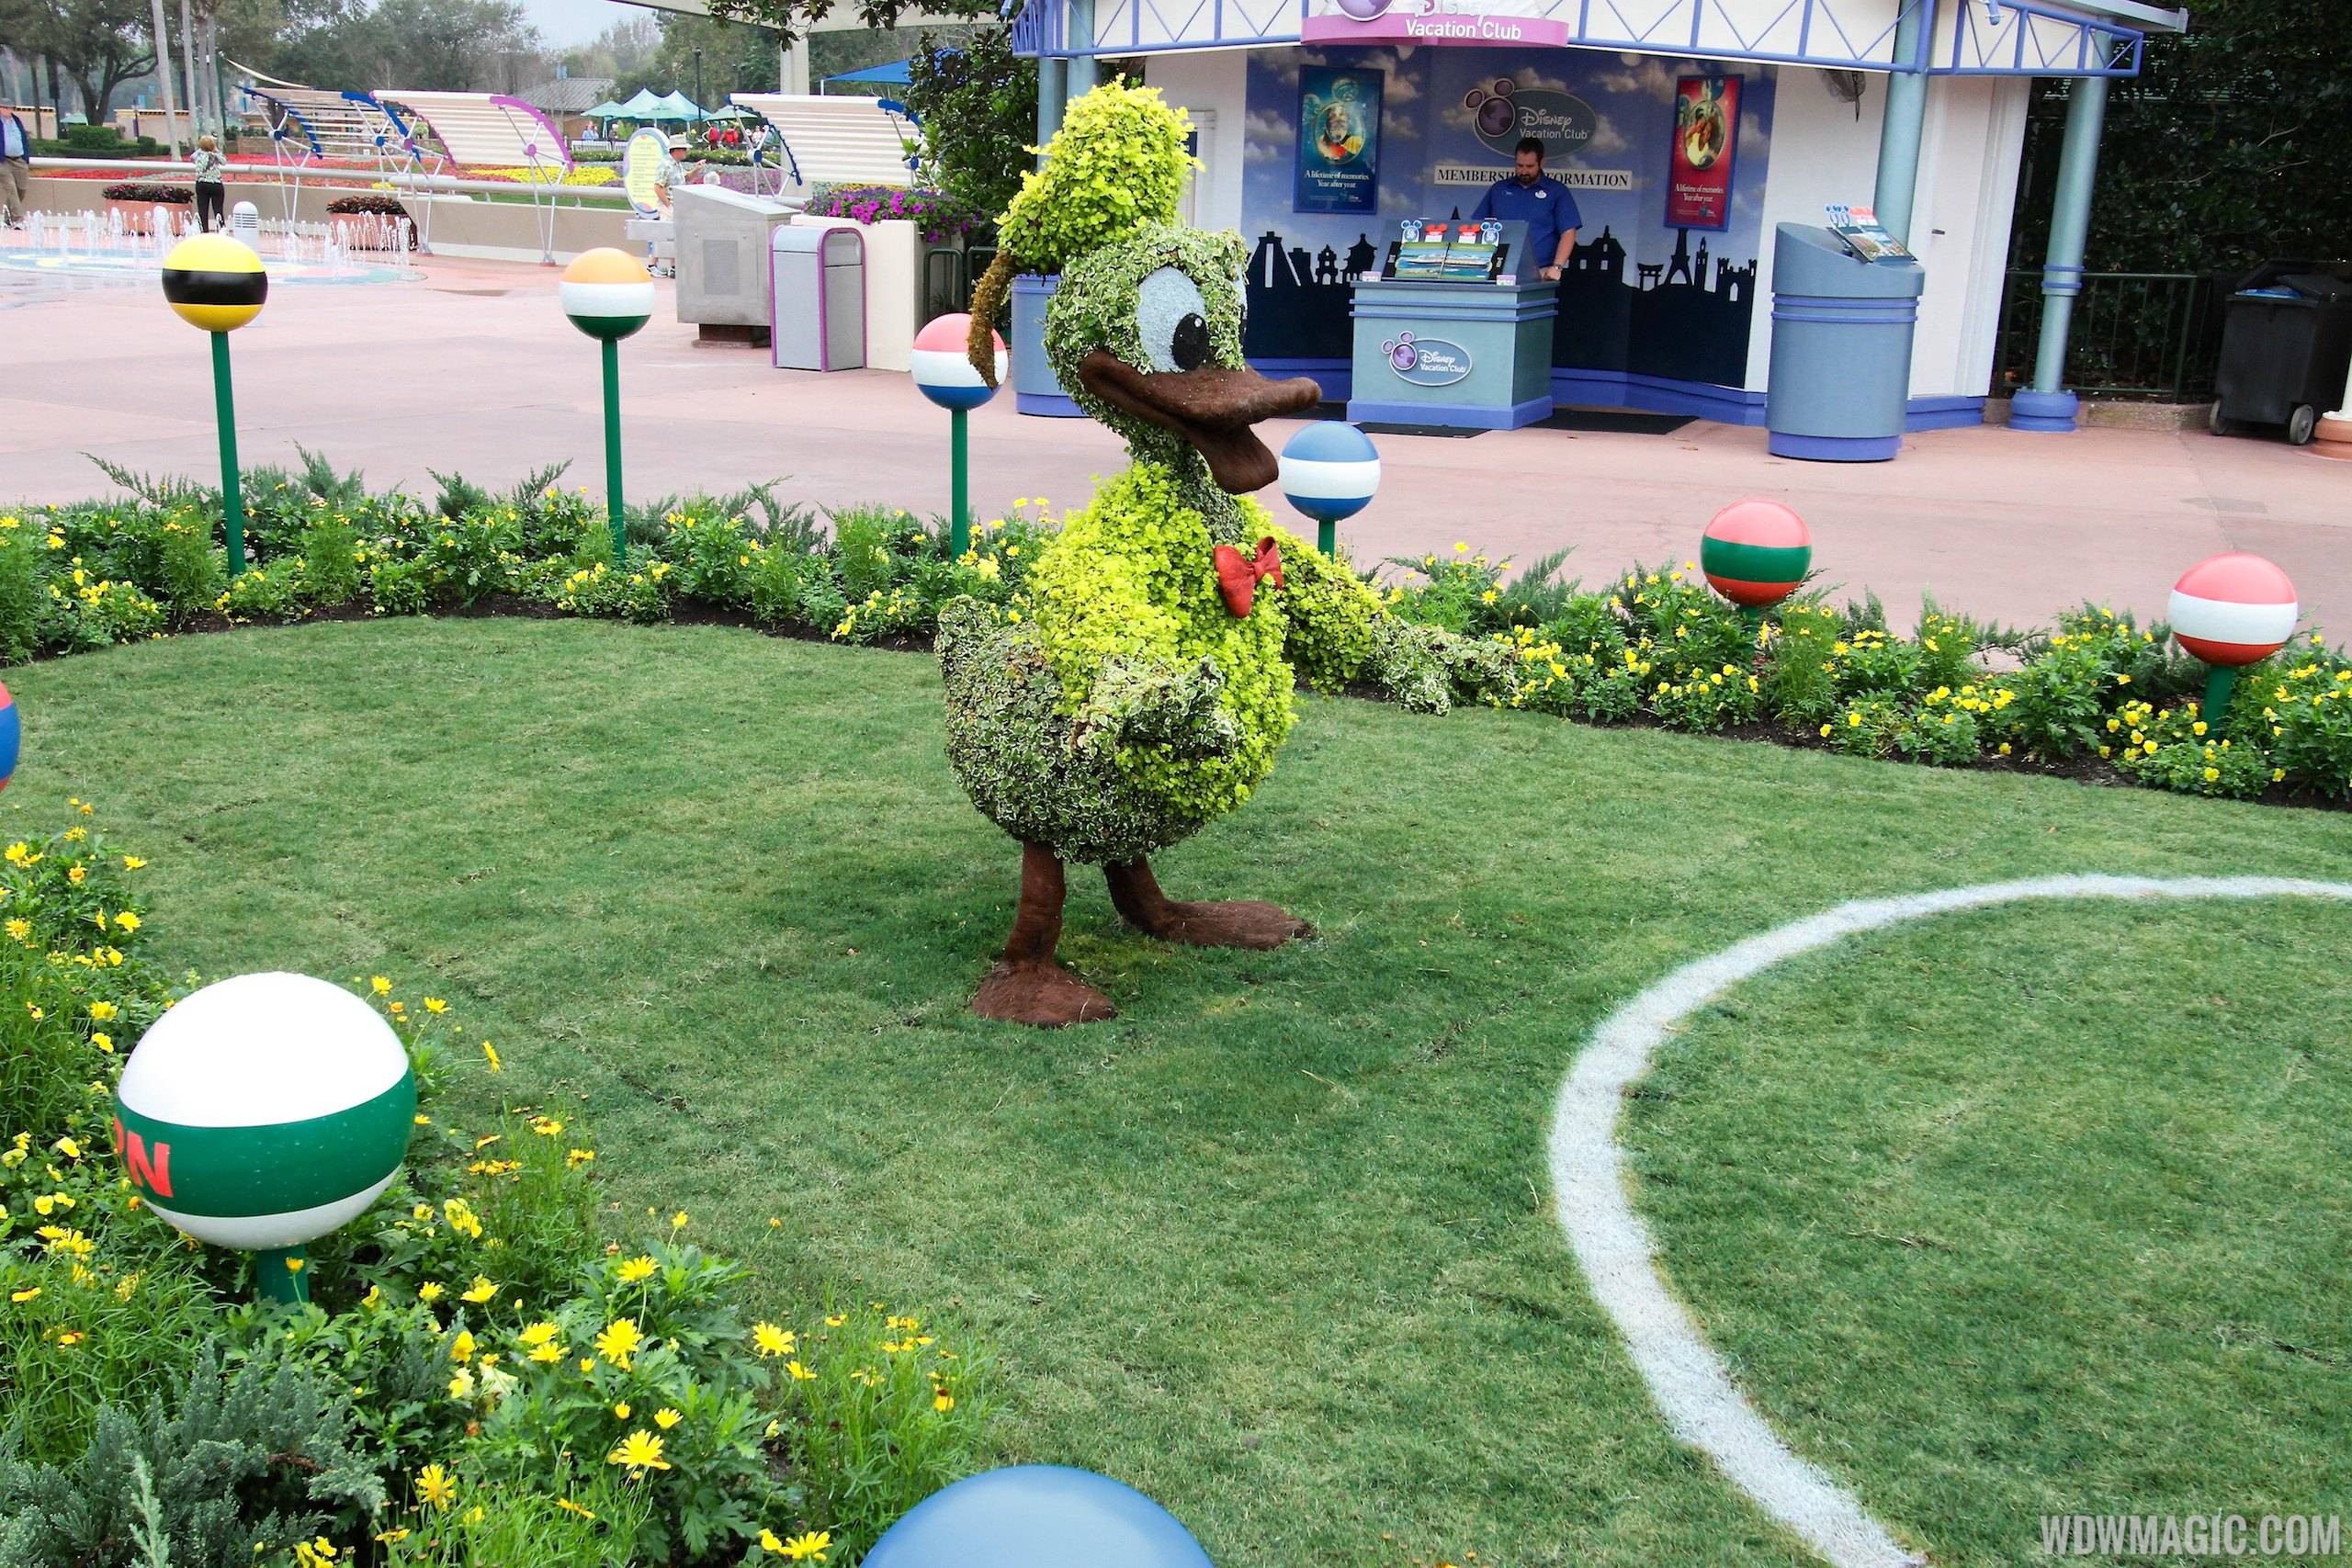 2014 Epcot Flower and Garden Festival - Donald Duck soccer topiary